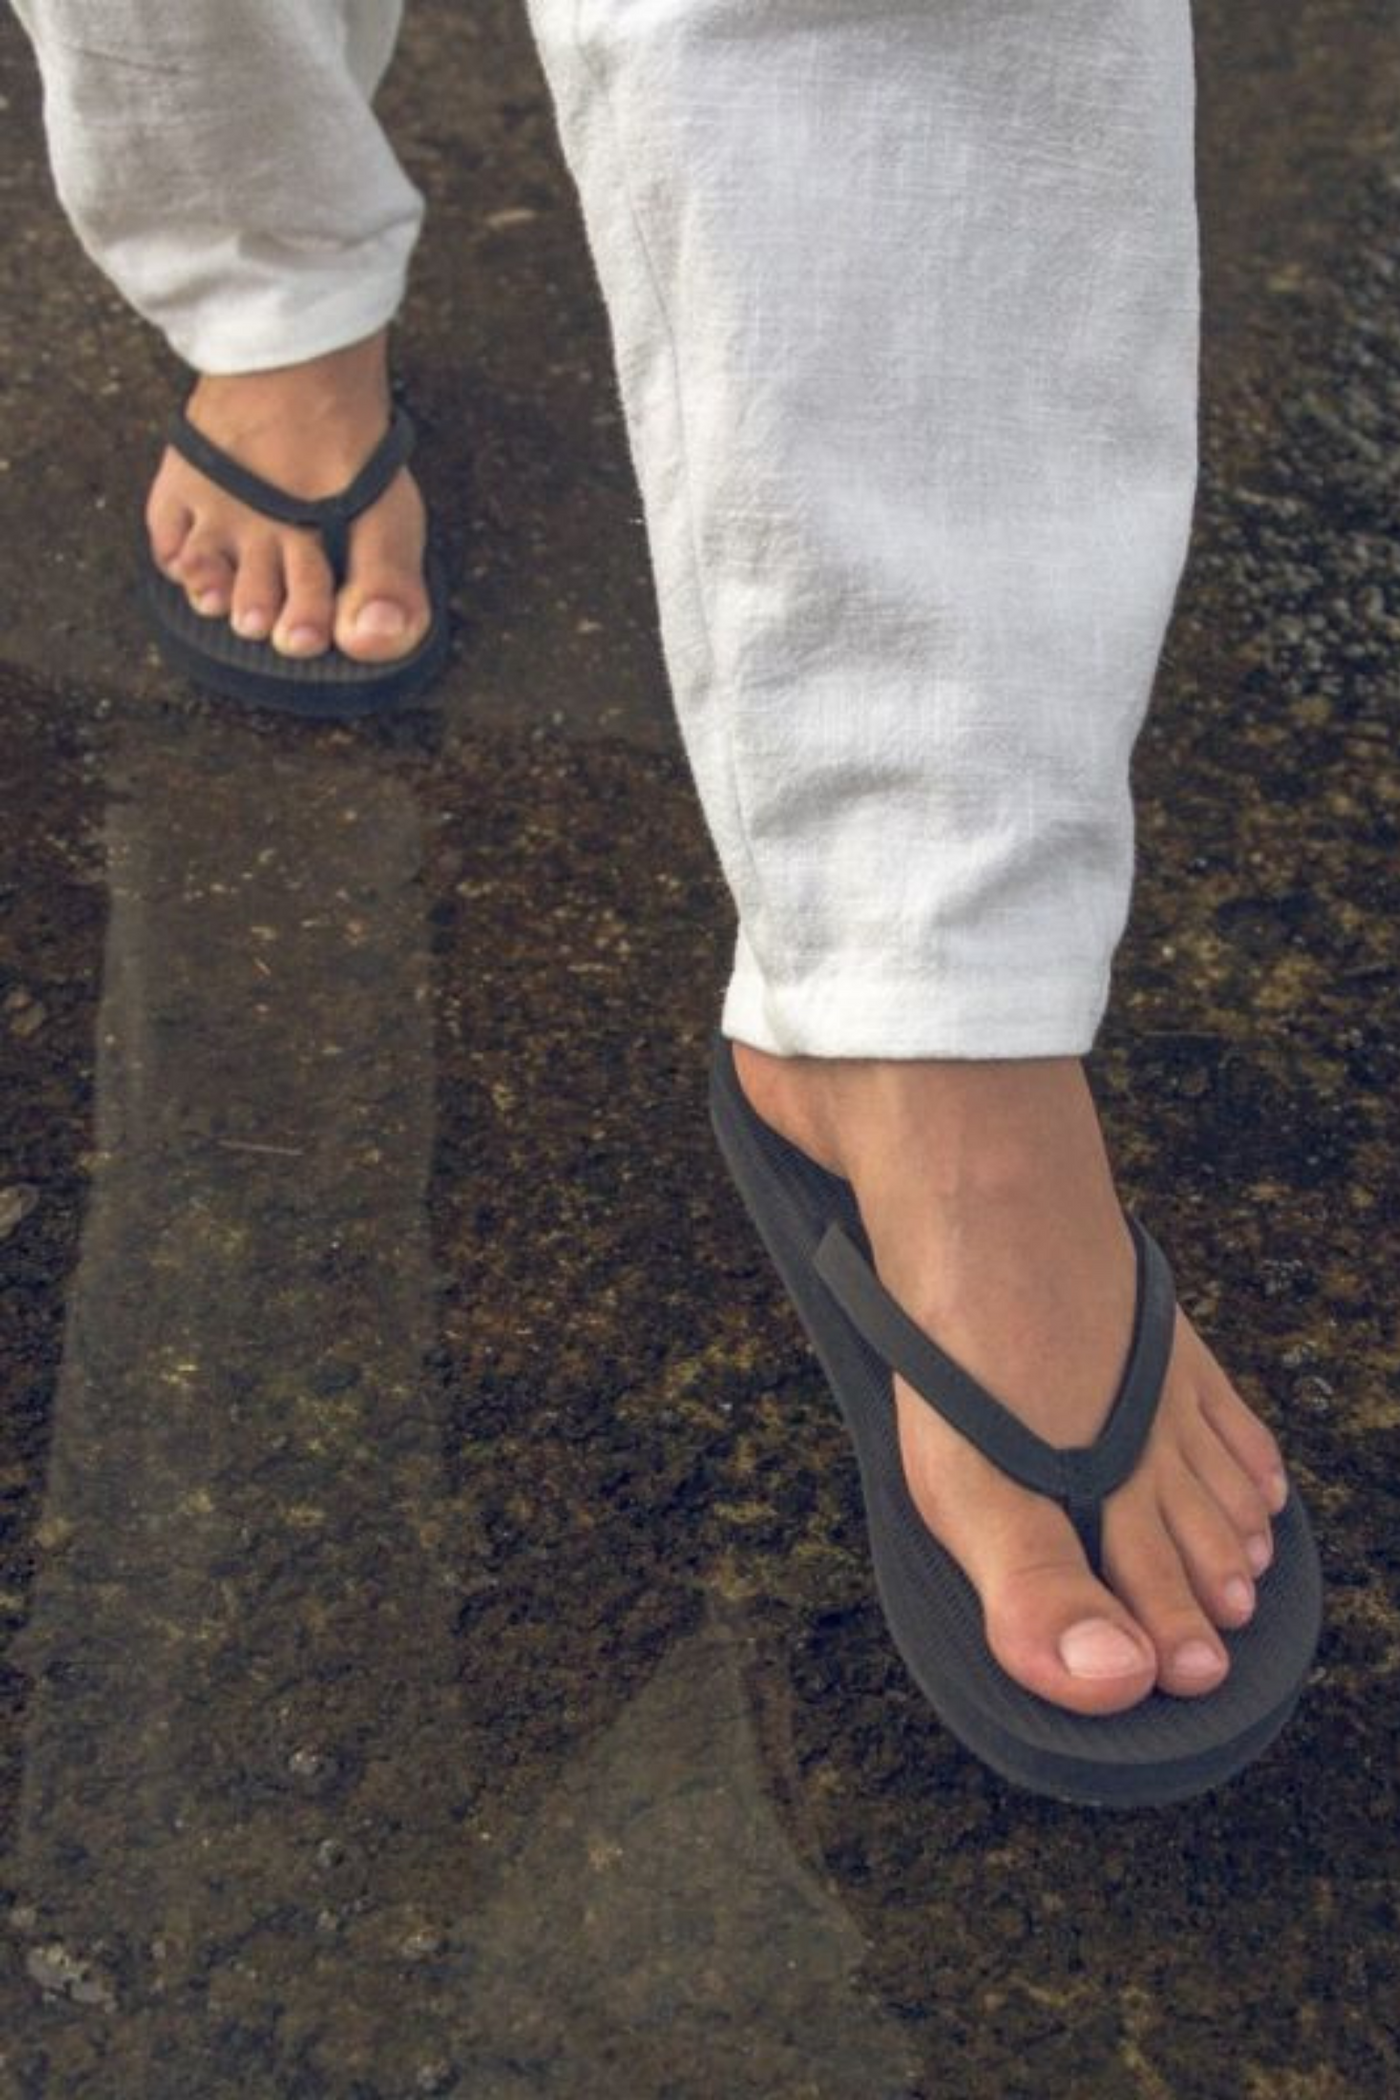 Indosole Women’s ESSNTLS Flip Flops in Black, available on ZERRIN with free Singapore shipping